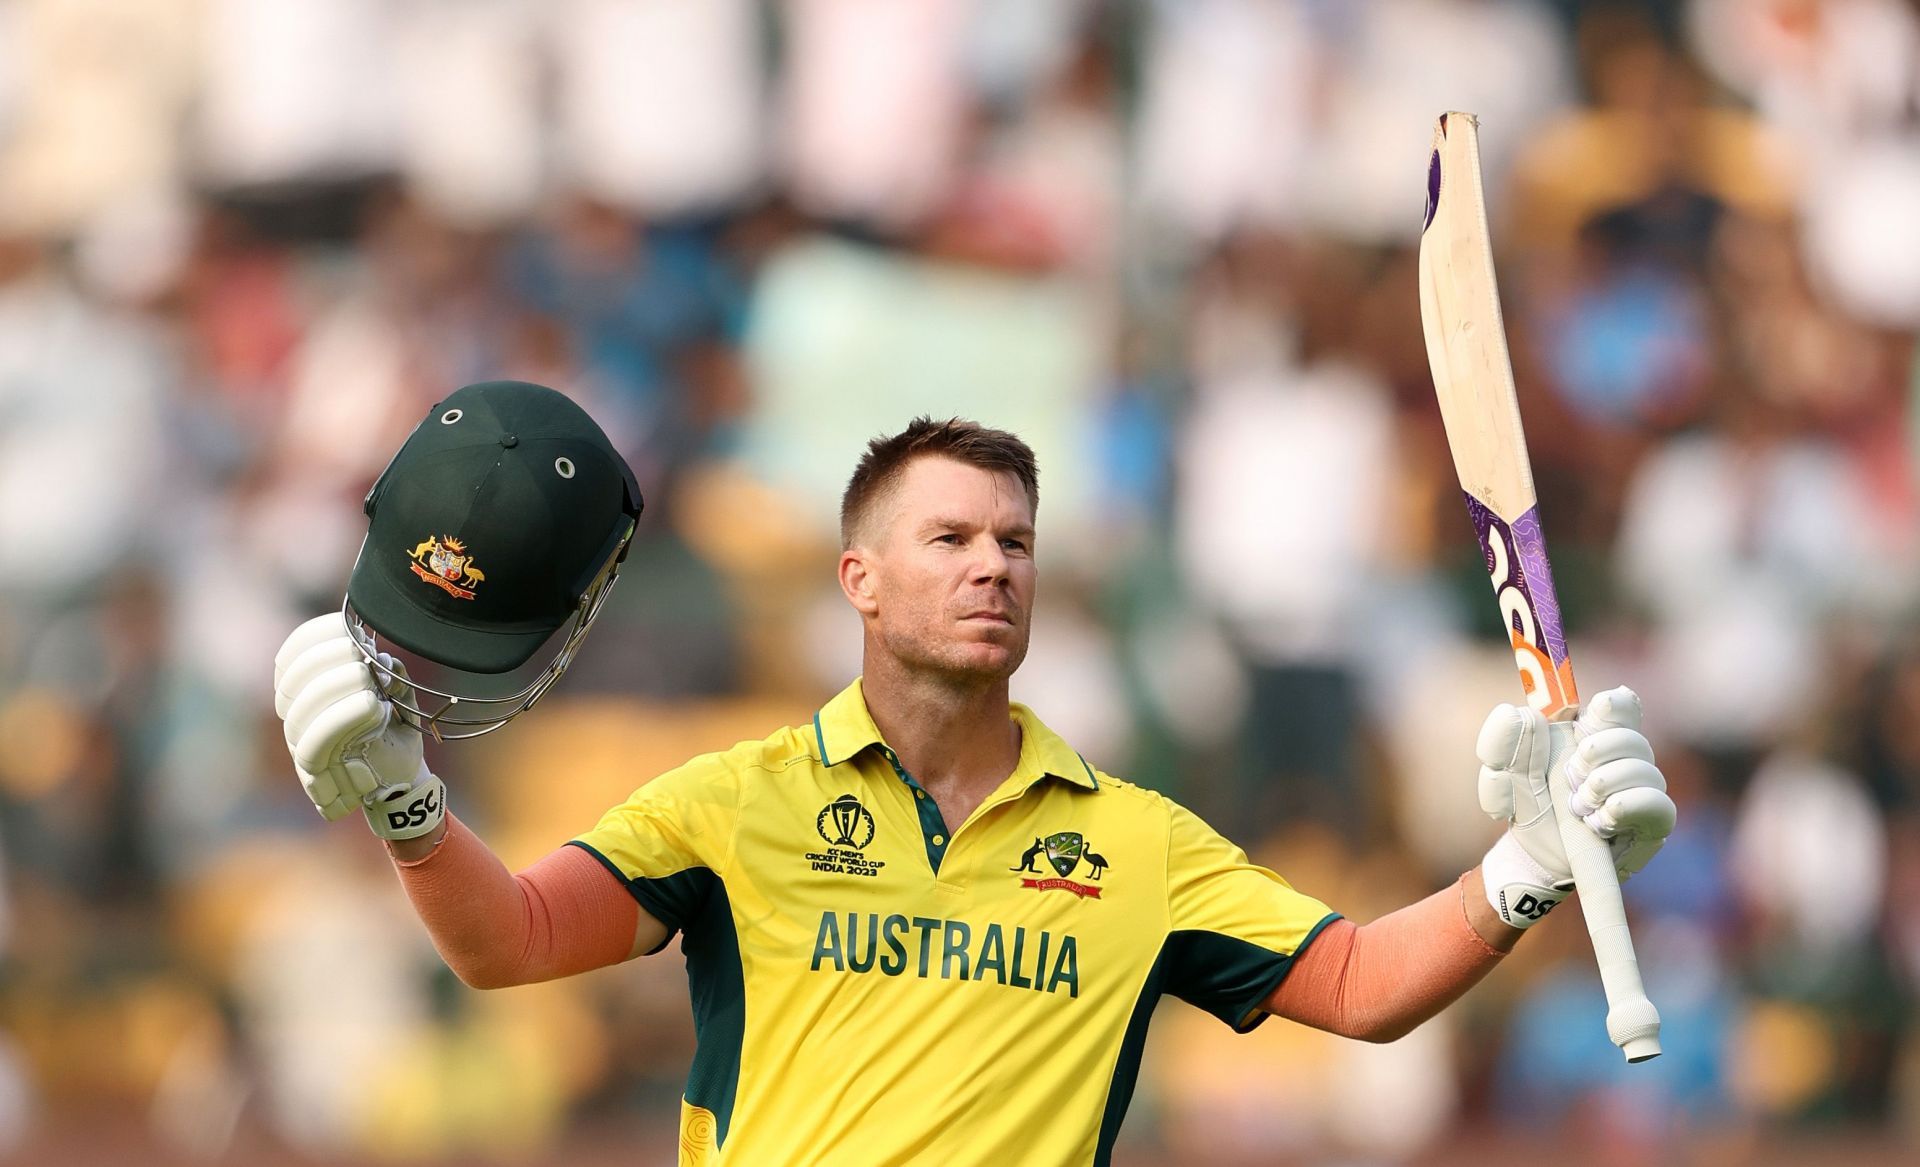 David Warner acknowledging the crowd after his milestone [Getty Images]